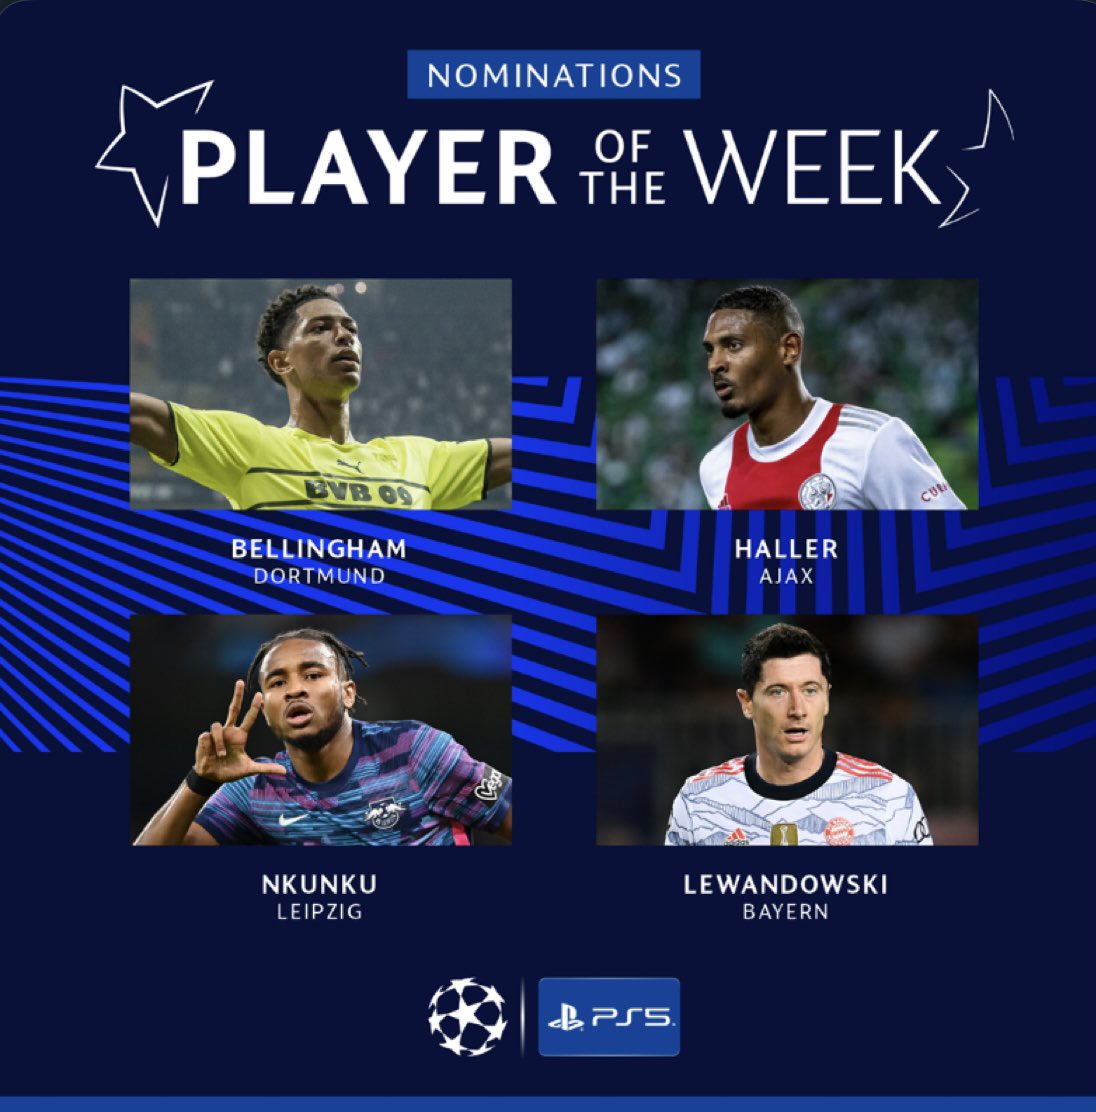 The nominees for the UEFA Champions League Player of the Week award